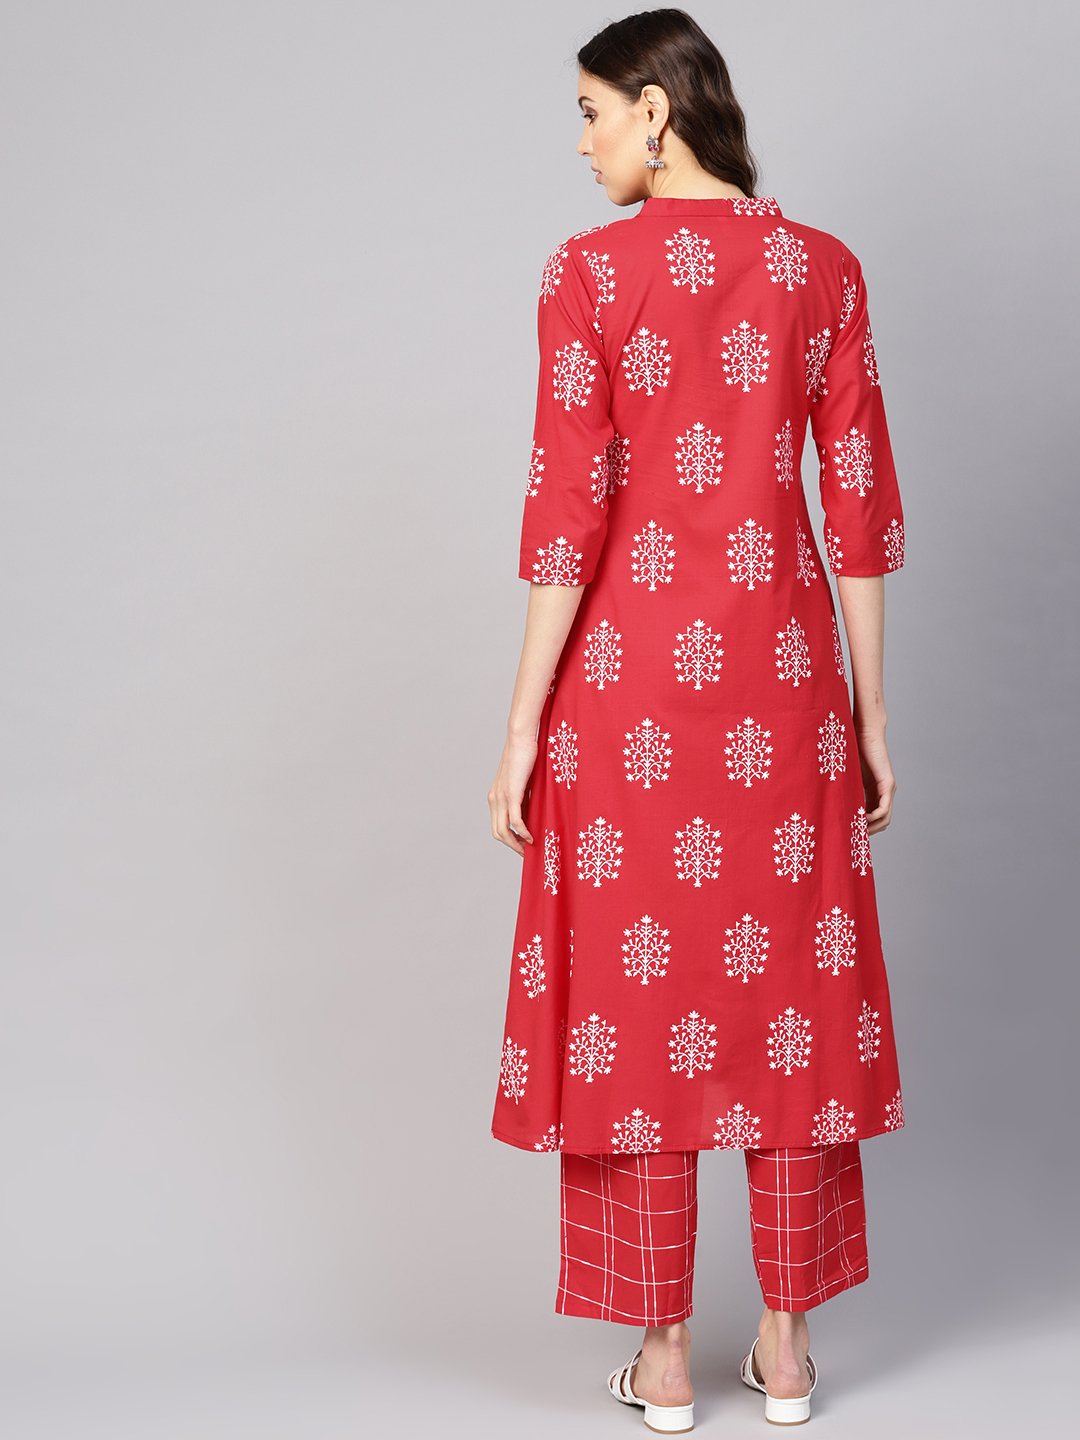 Women's Red & White Printed Kurta With Trousers - Nayo Clothing